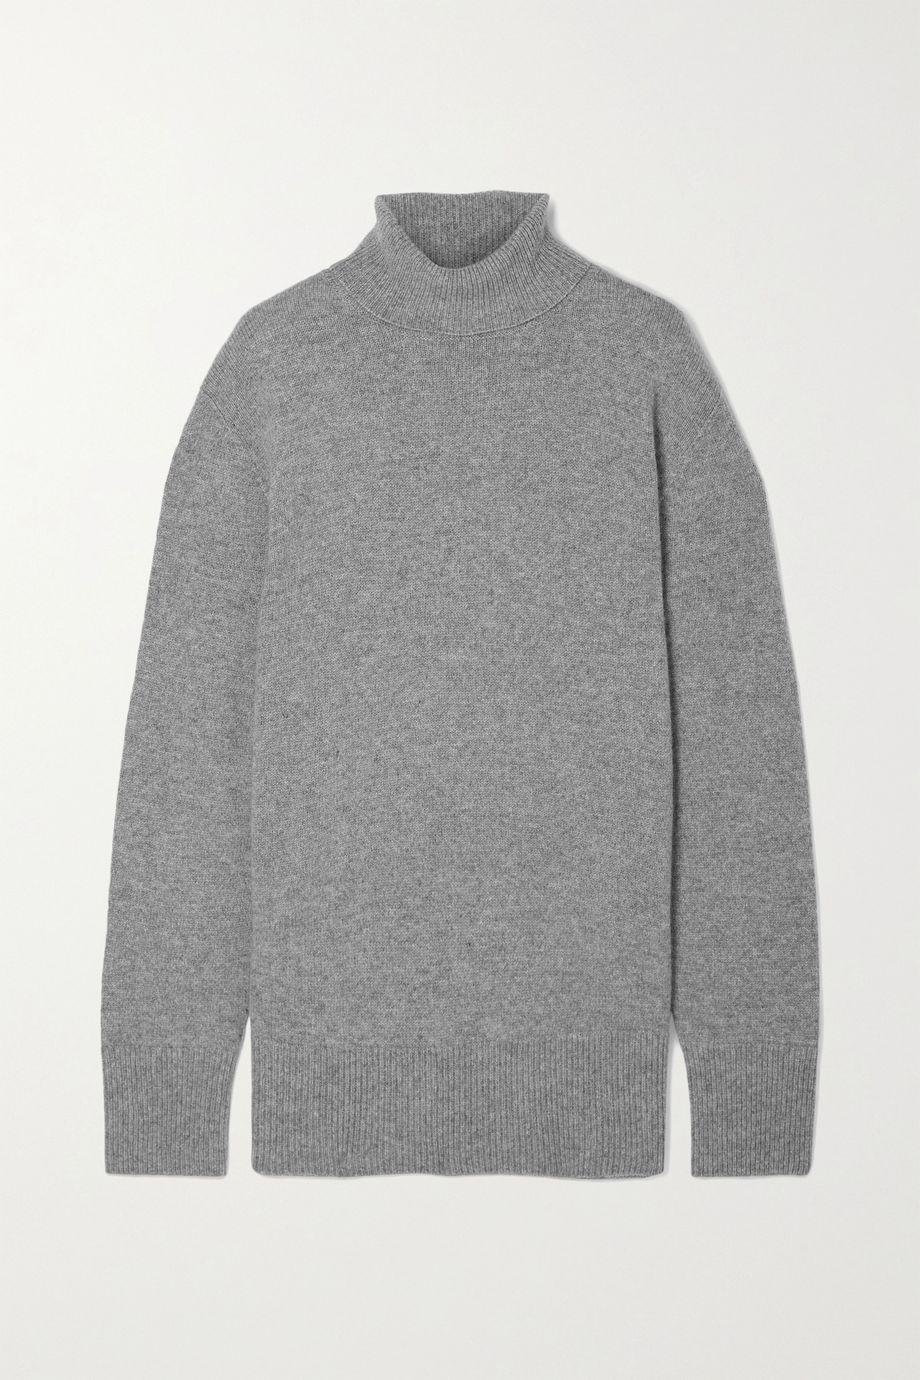 Stepny wool and cashmere-blend turtleneck sweater by THE ROW